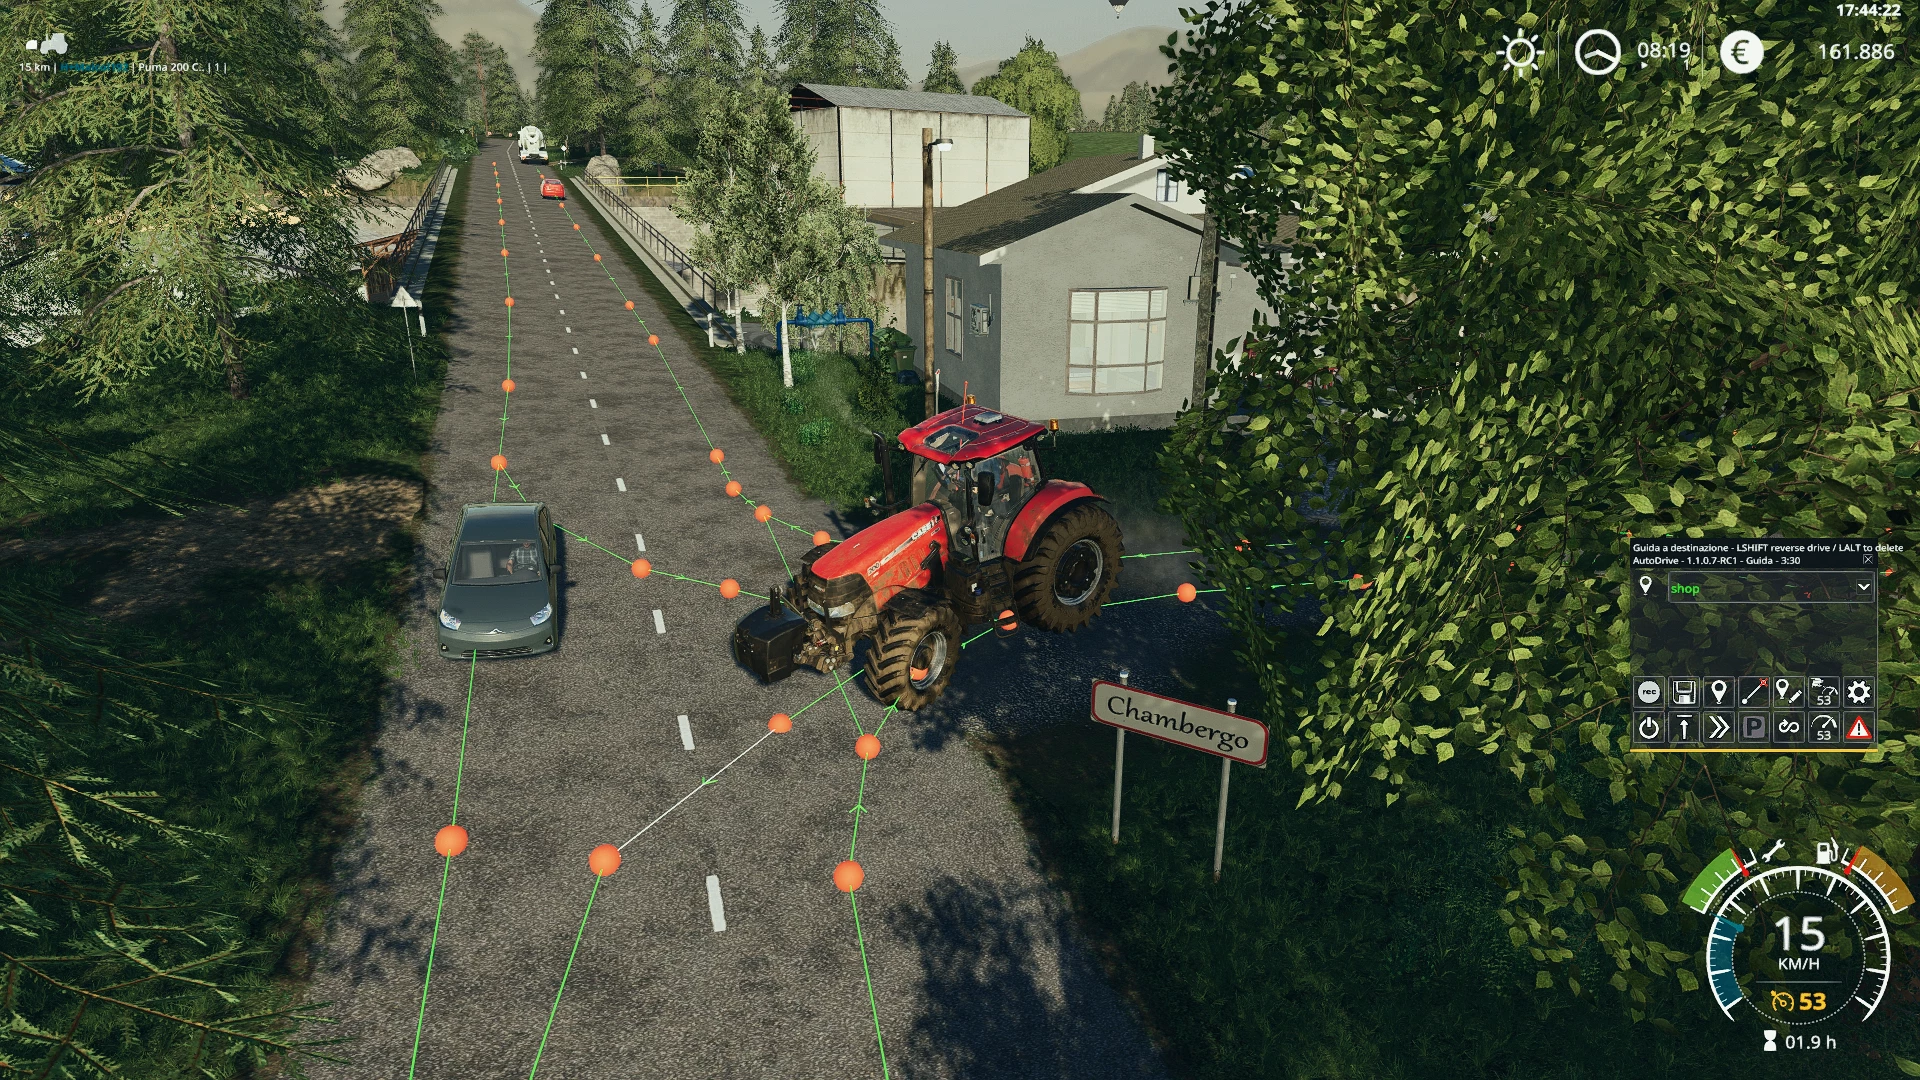 AUTODRIVE FOR CHAMBERG VALLEY V1.0